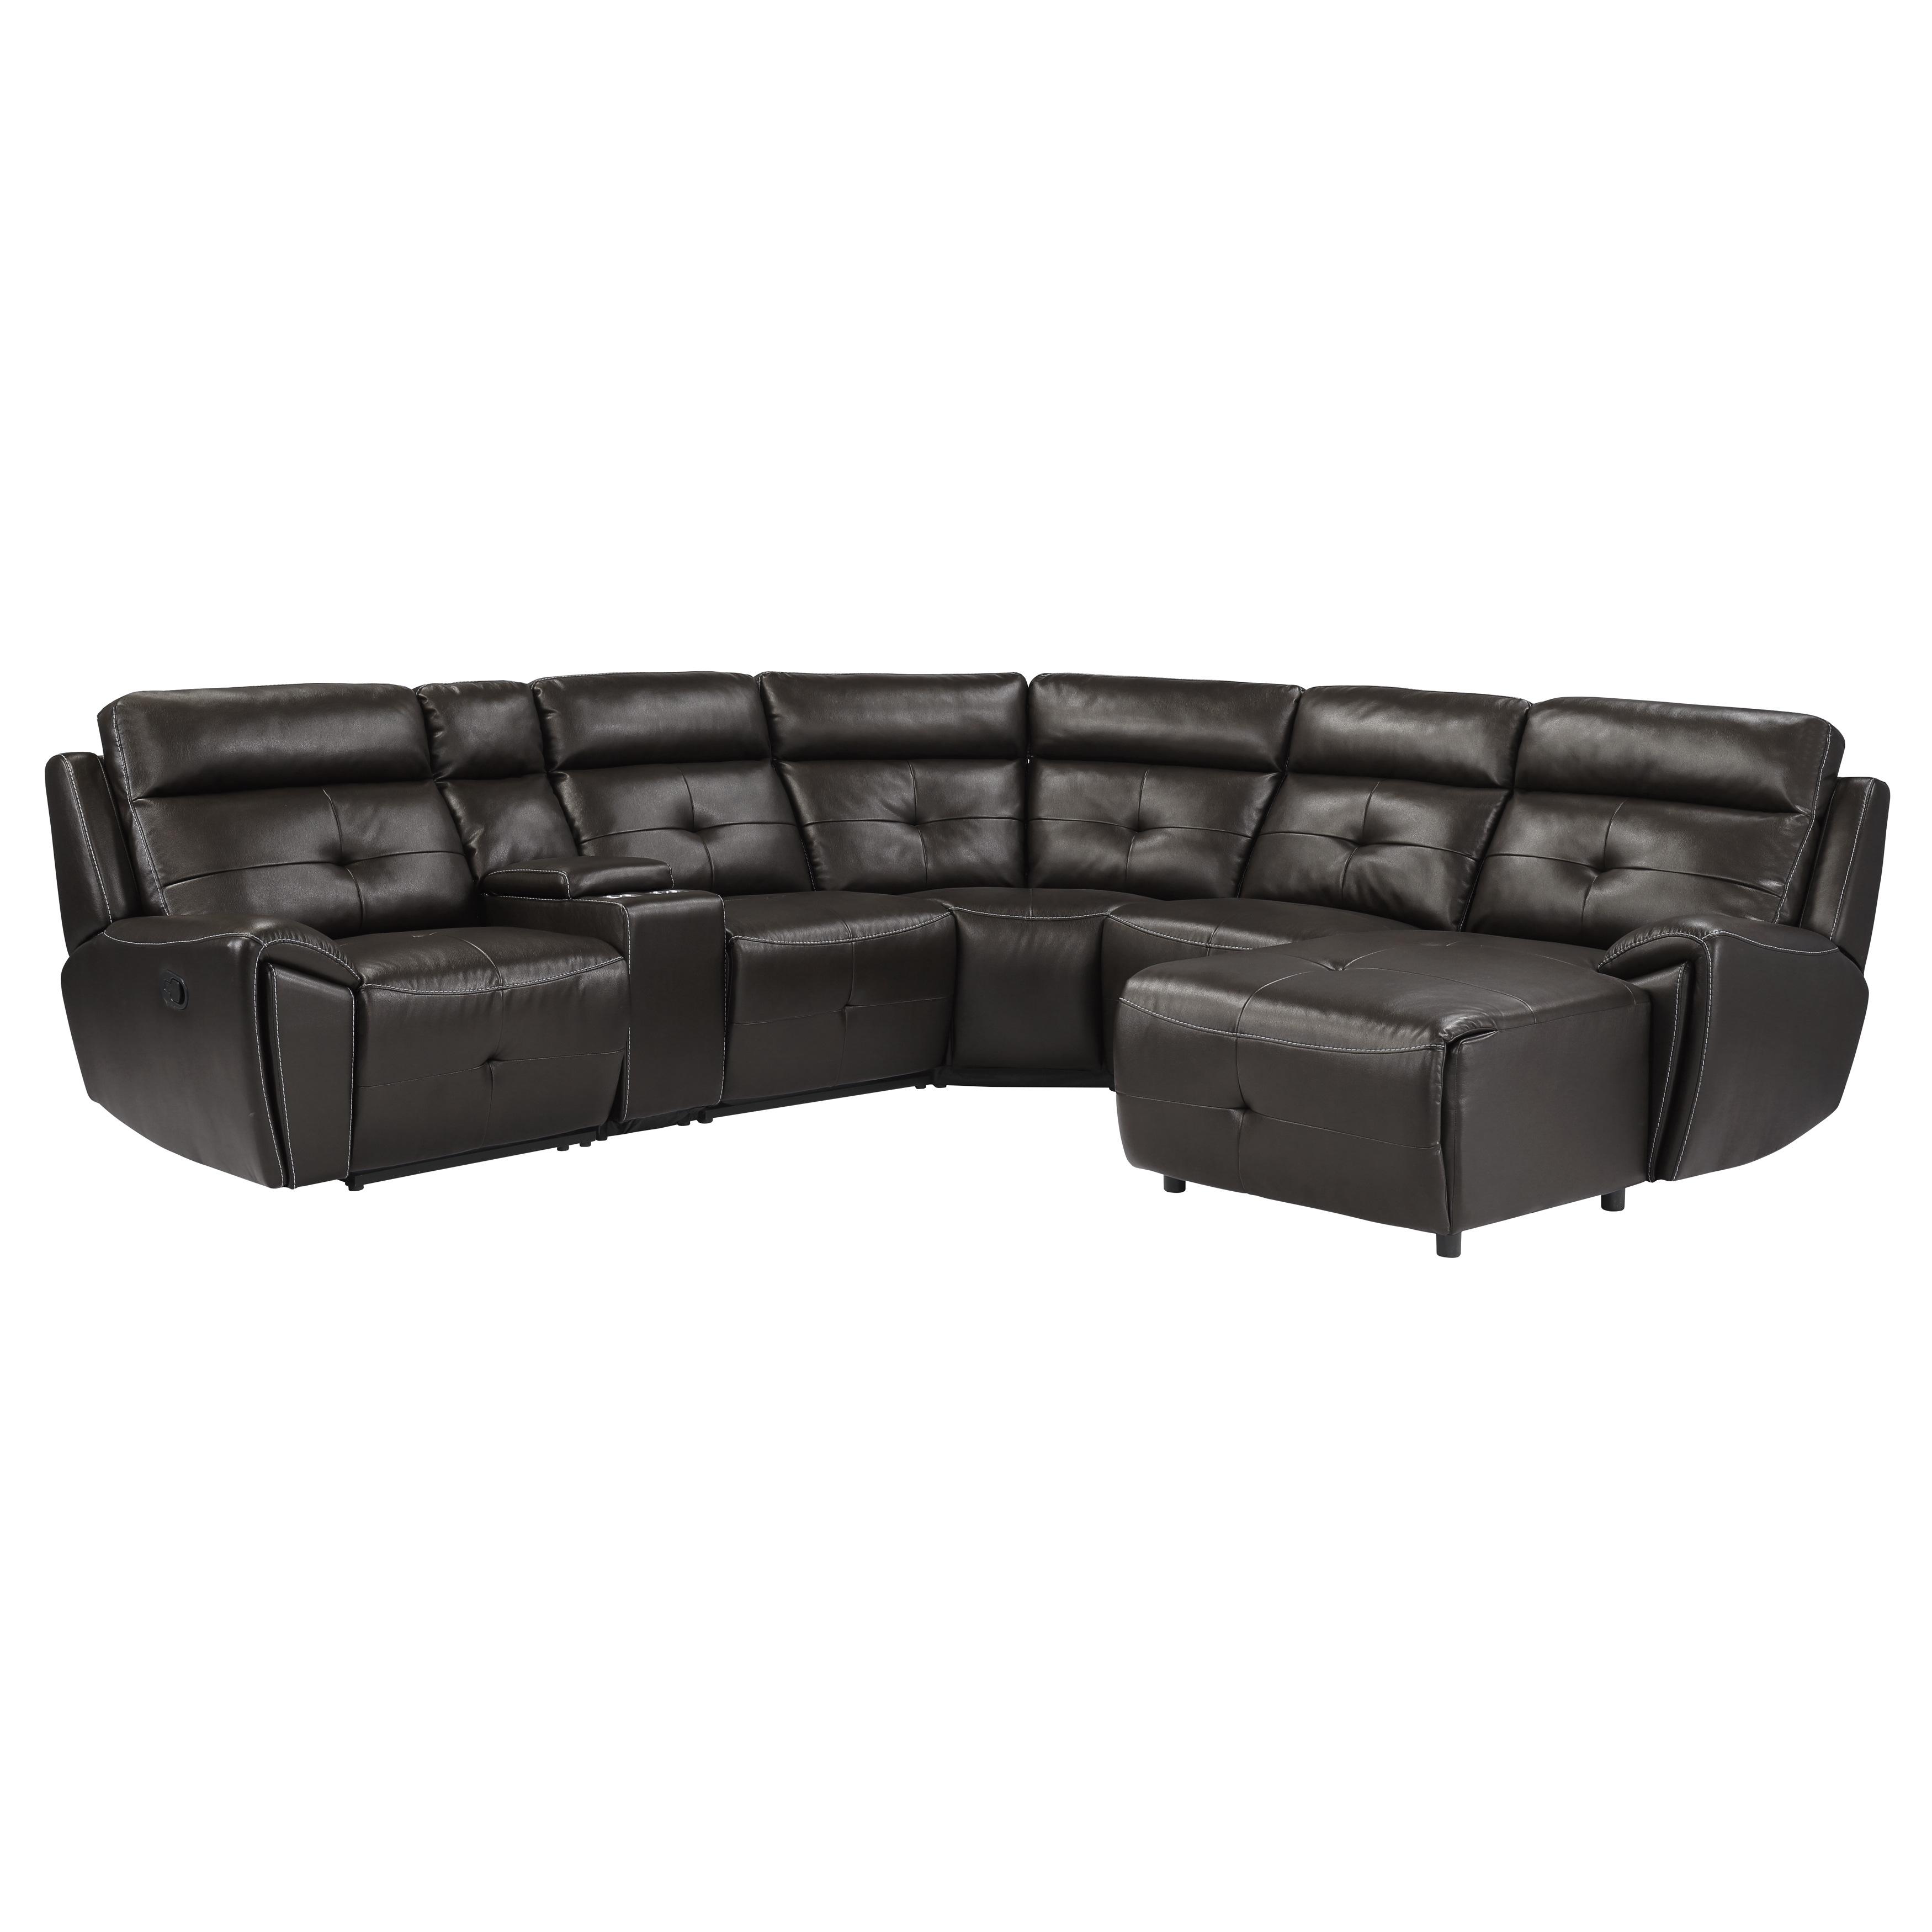 

    
Modern Dark Brown Faux Leather 6-Piece RSF Reclining Sectional Homelegance 9469DBR*6LRRC Avenue
